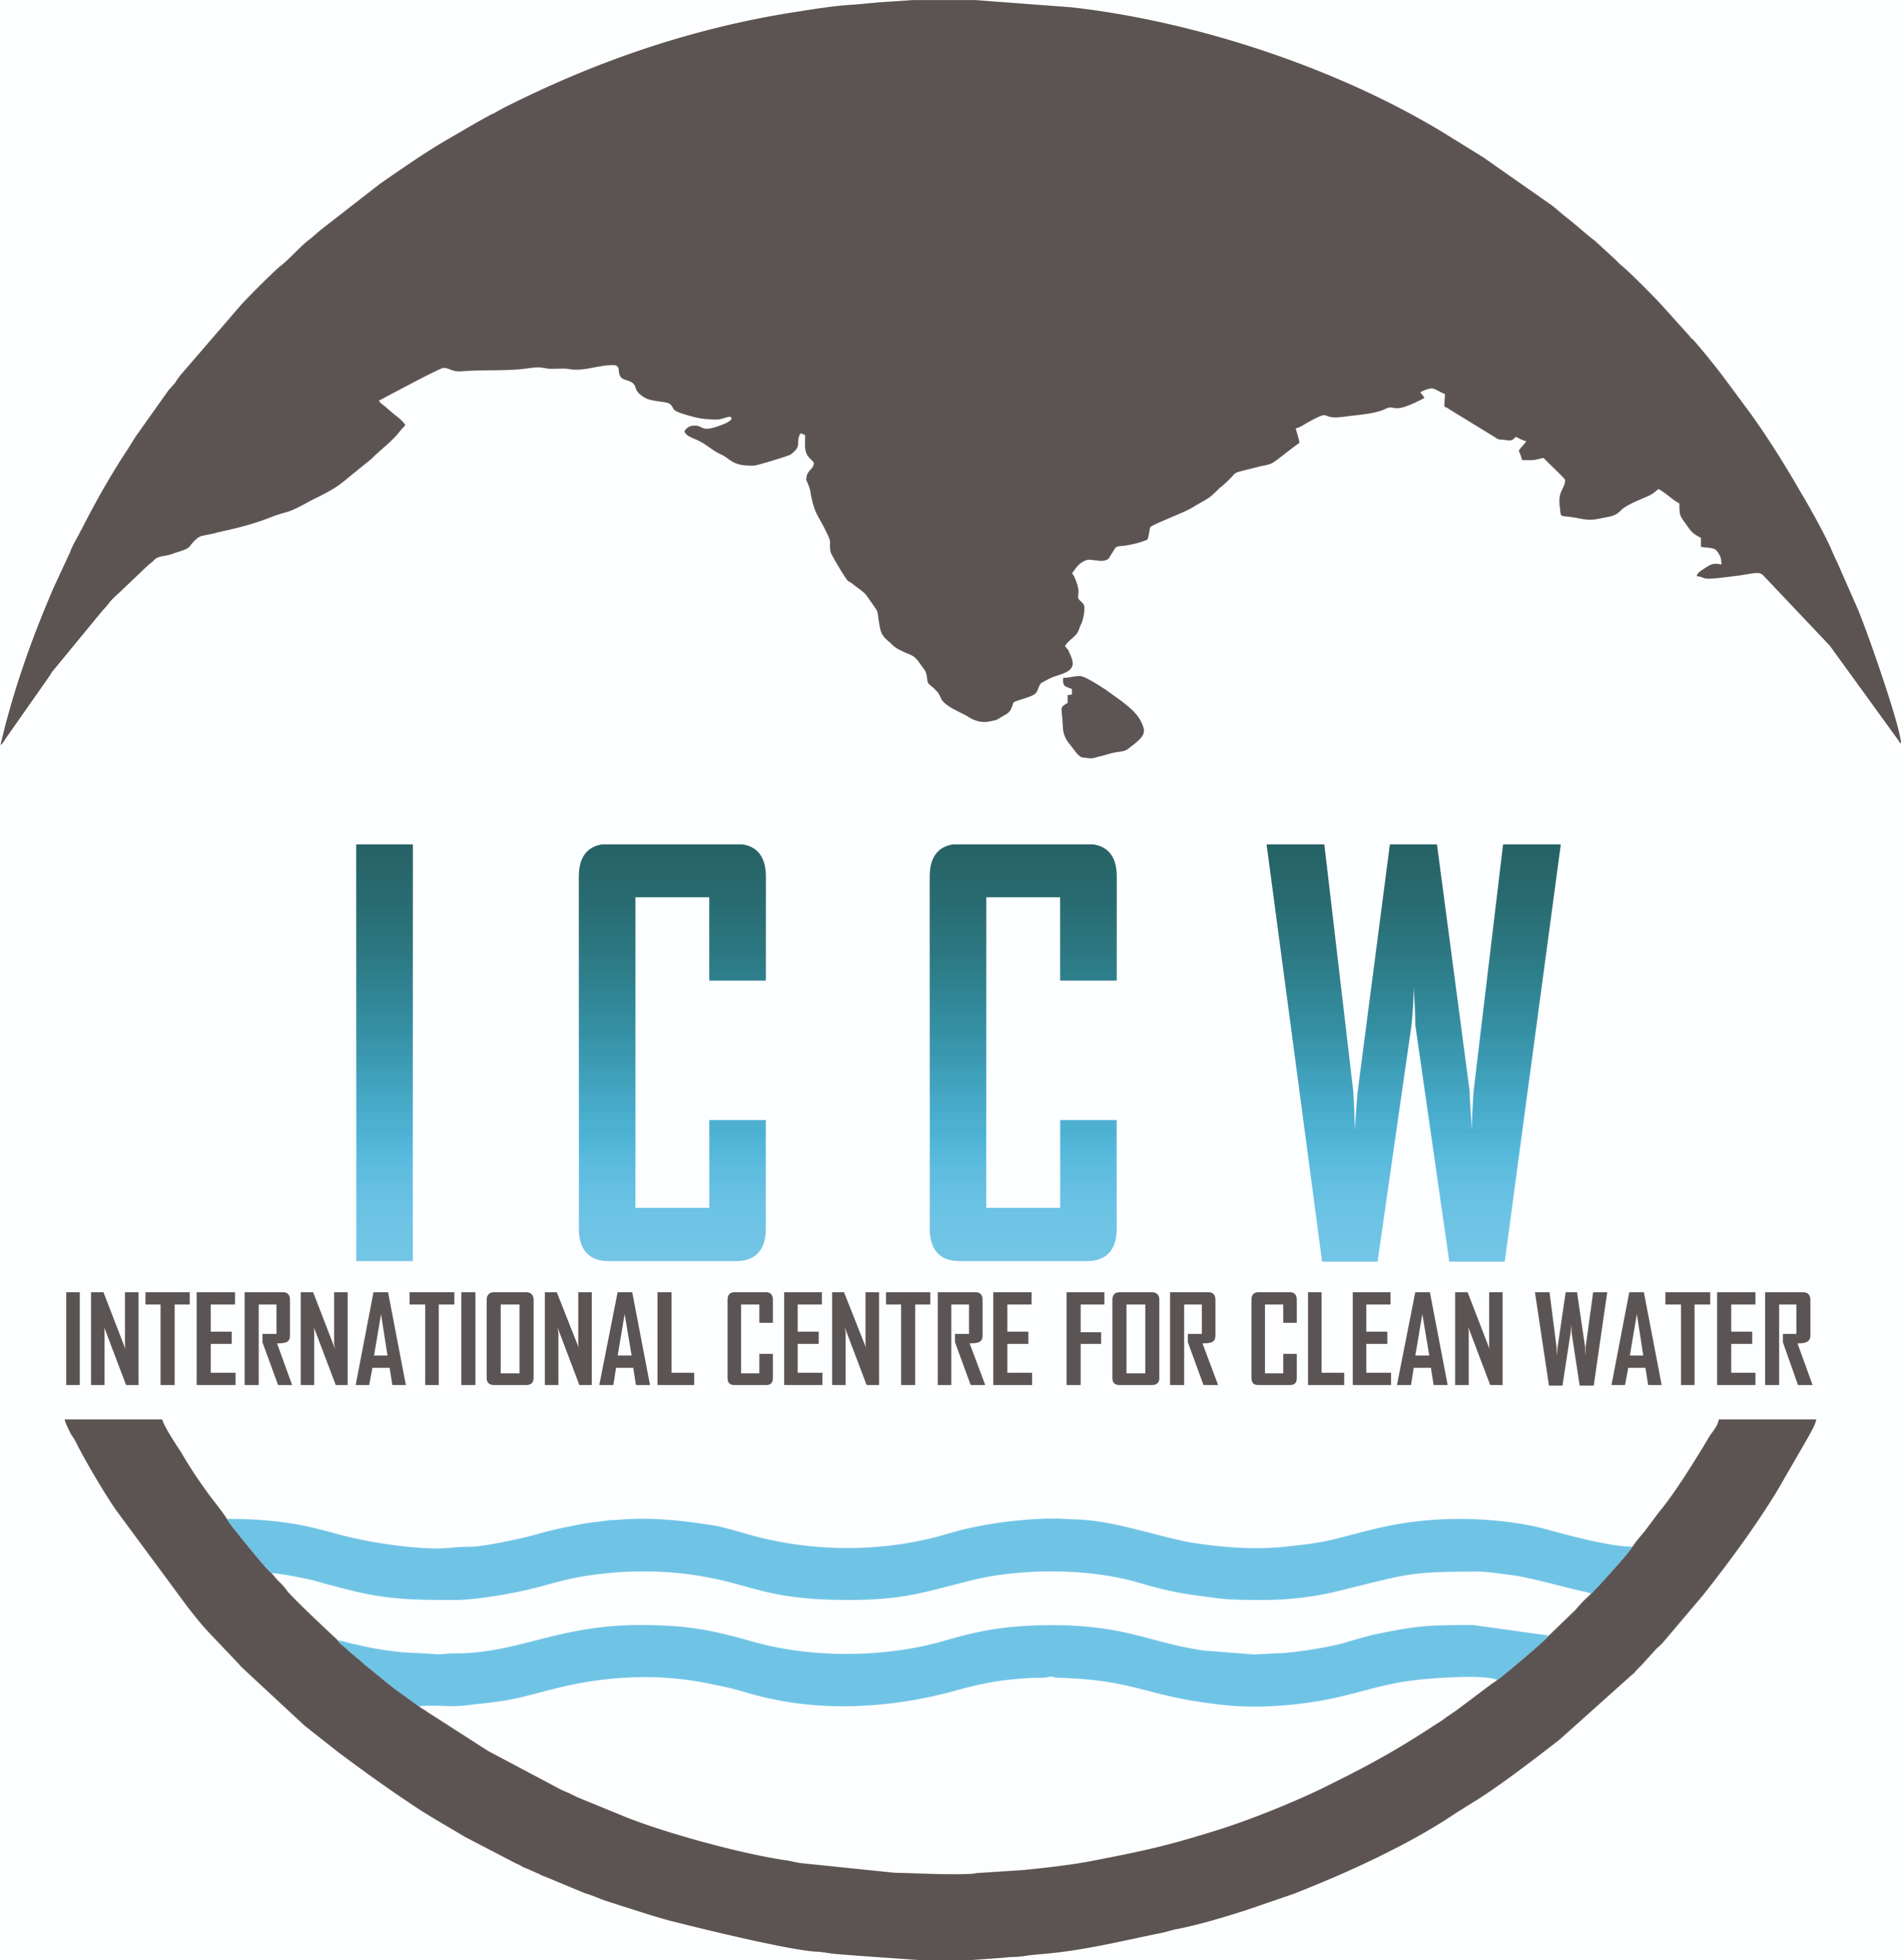 ICCW INDIA, INTERNATIONAL CENTER FOR CLEAN WATER